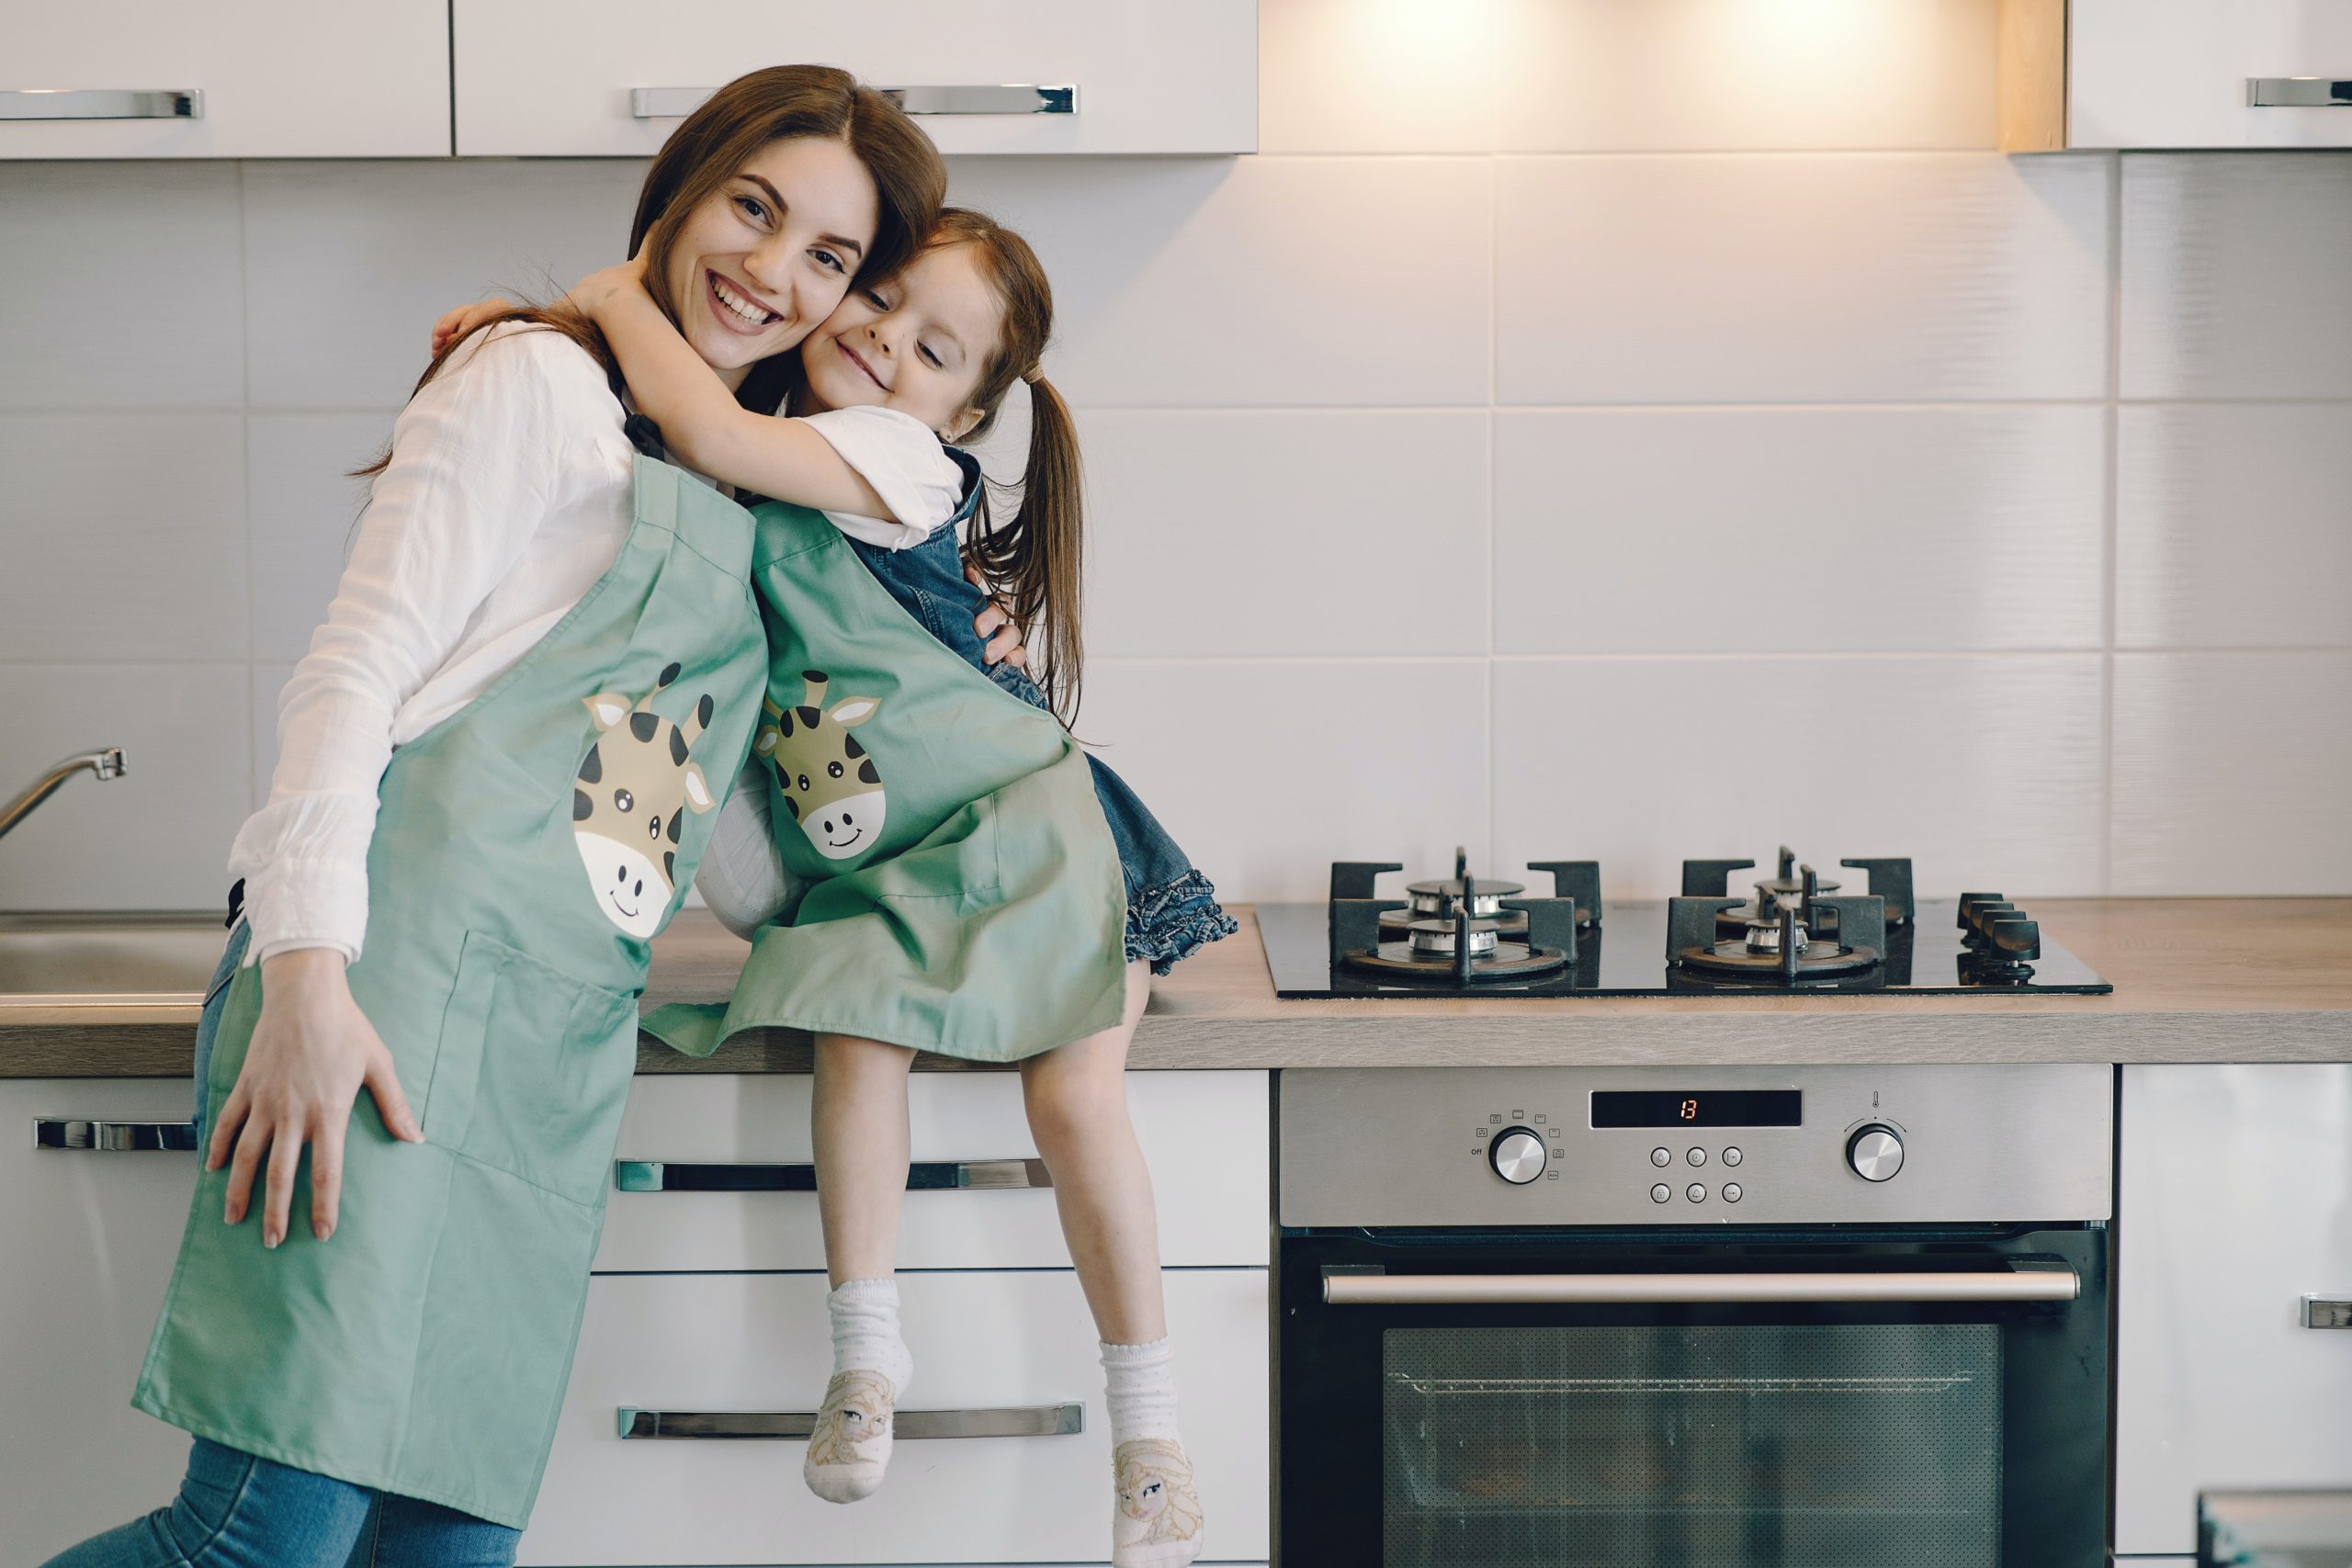 mom and daughter in the kitchen